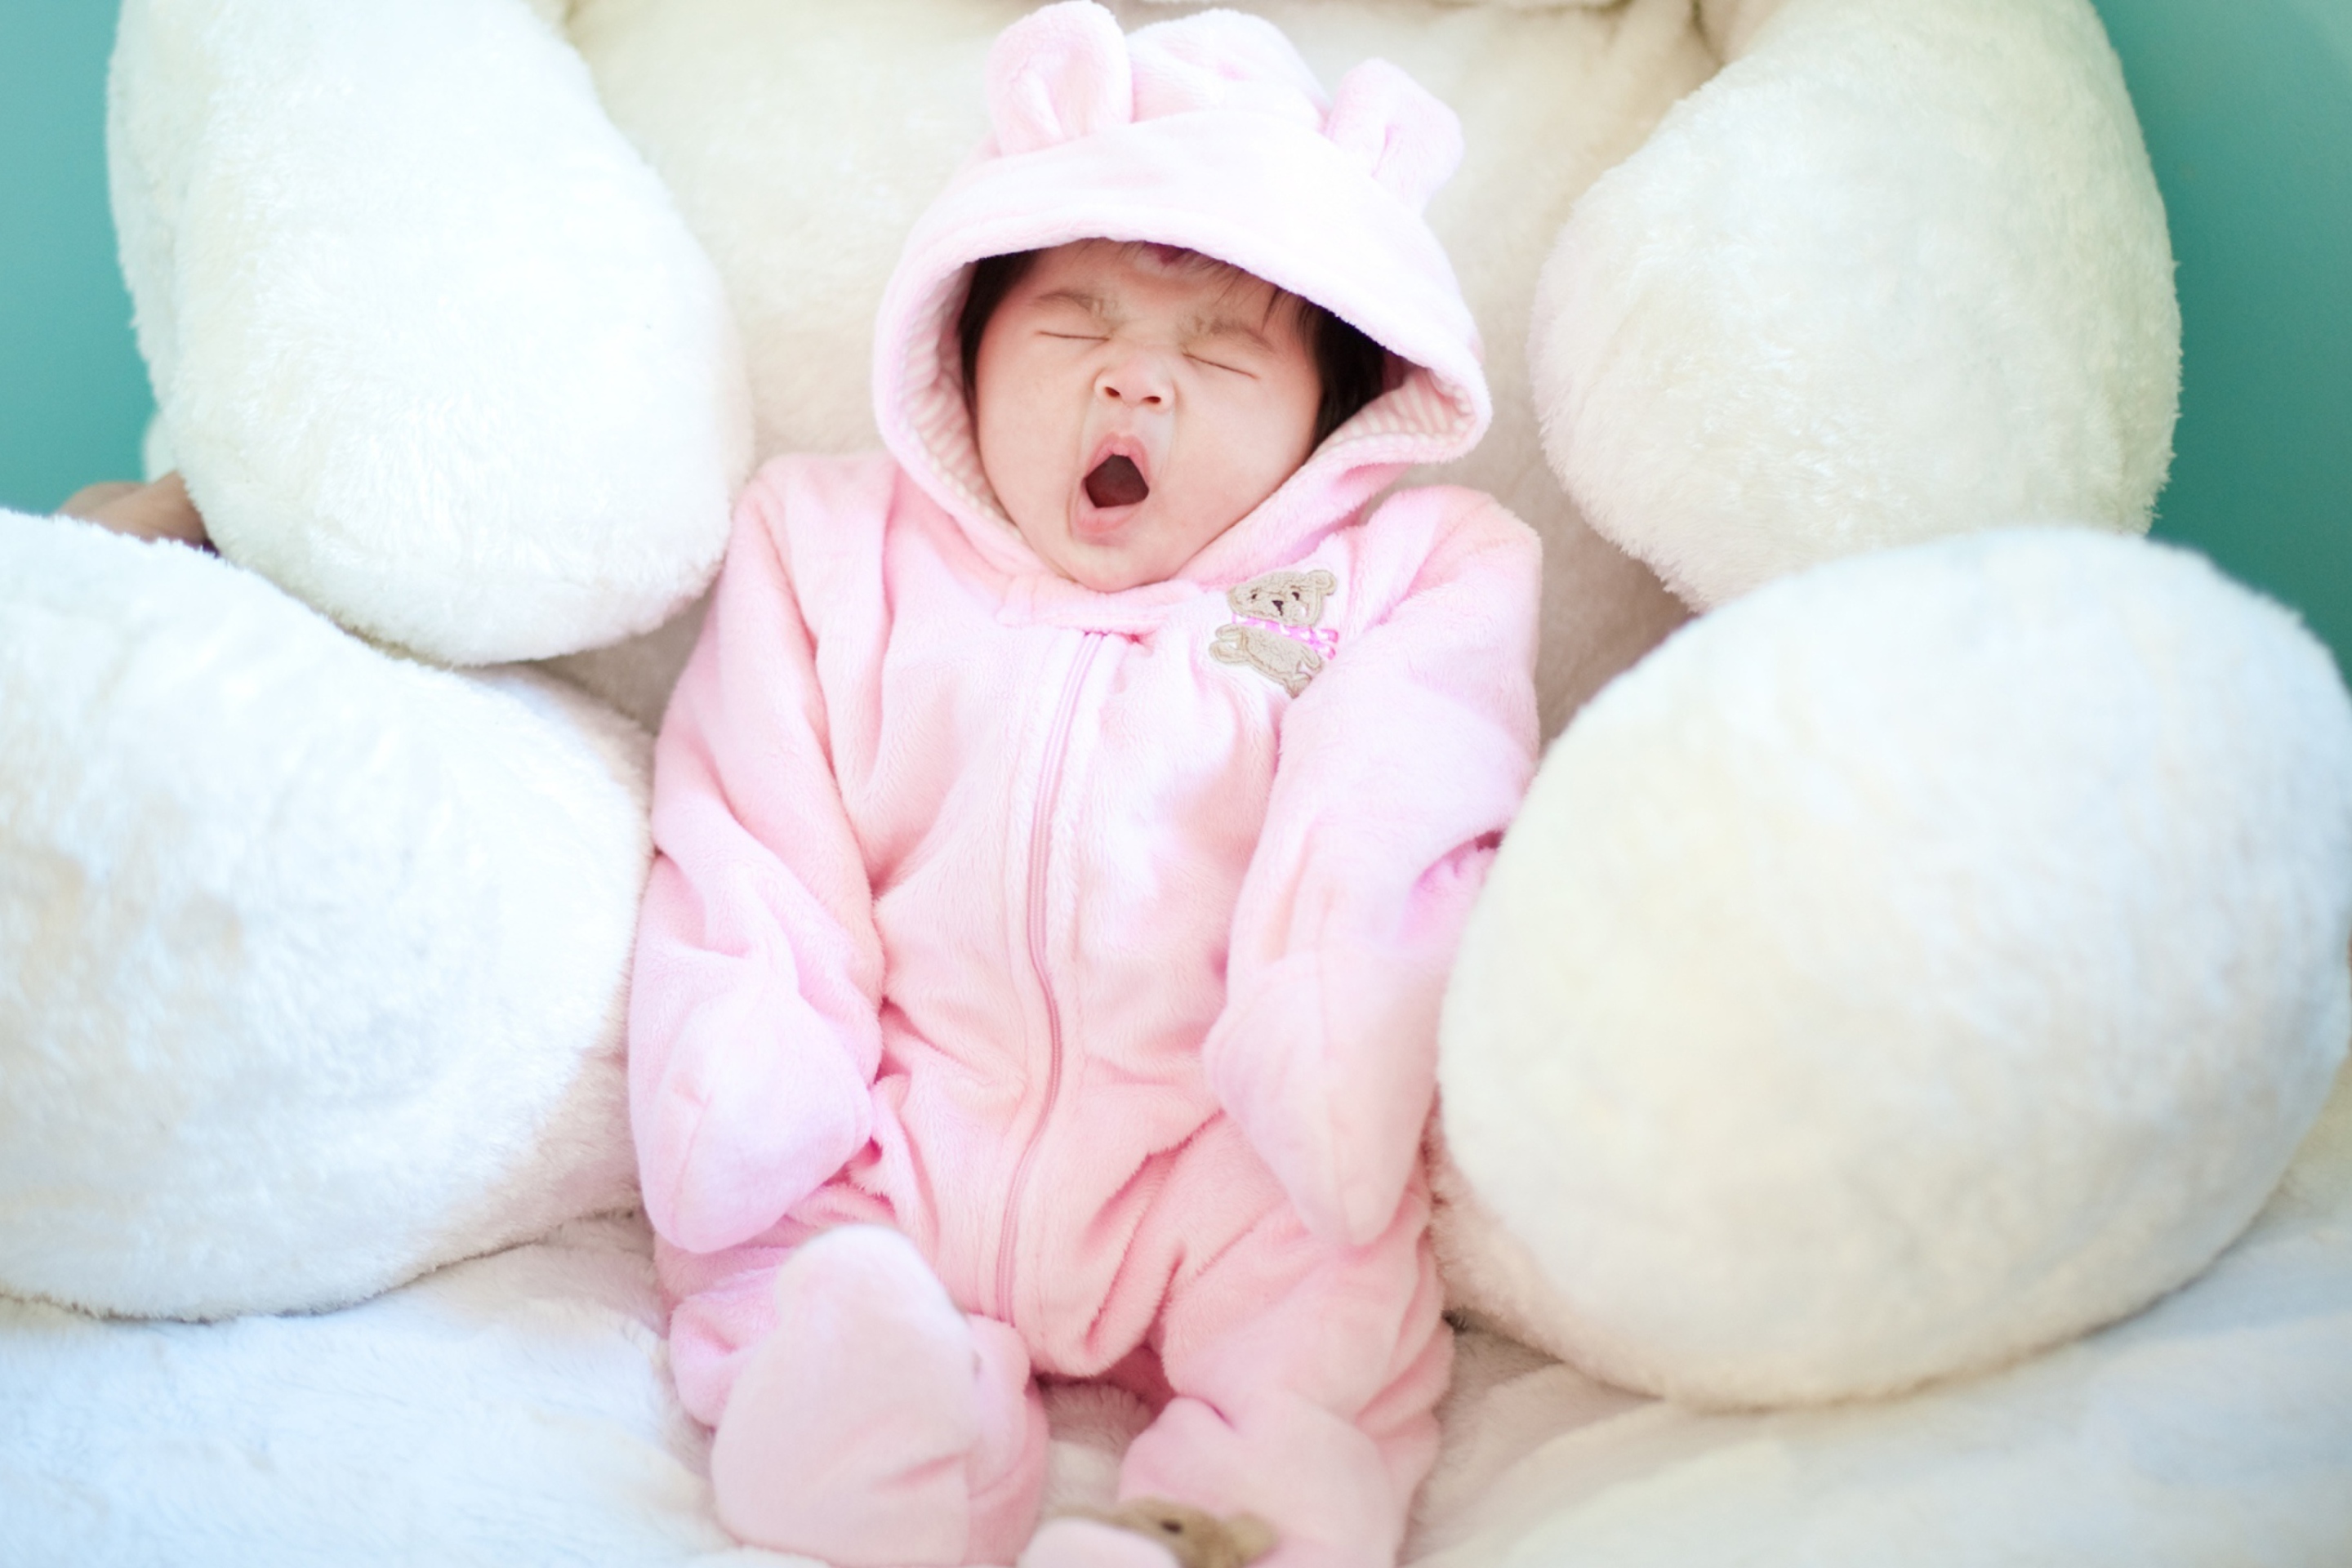 Crying Baby wallpaper 2880x1920